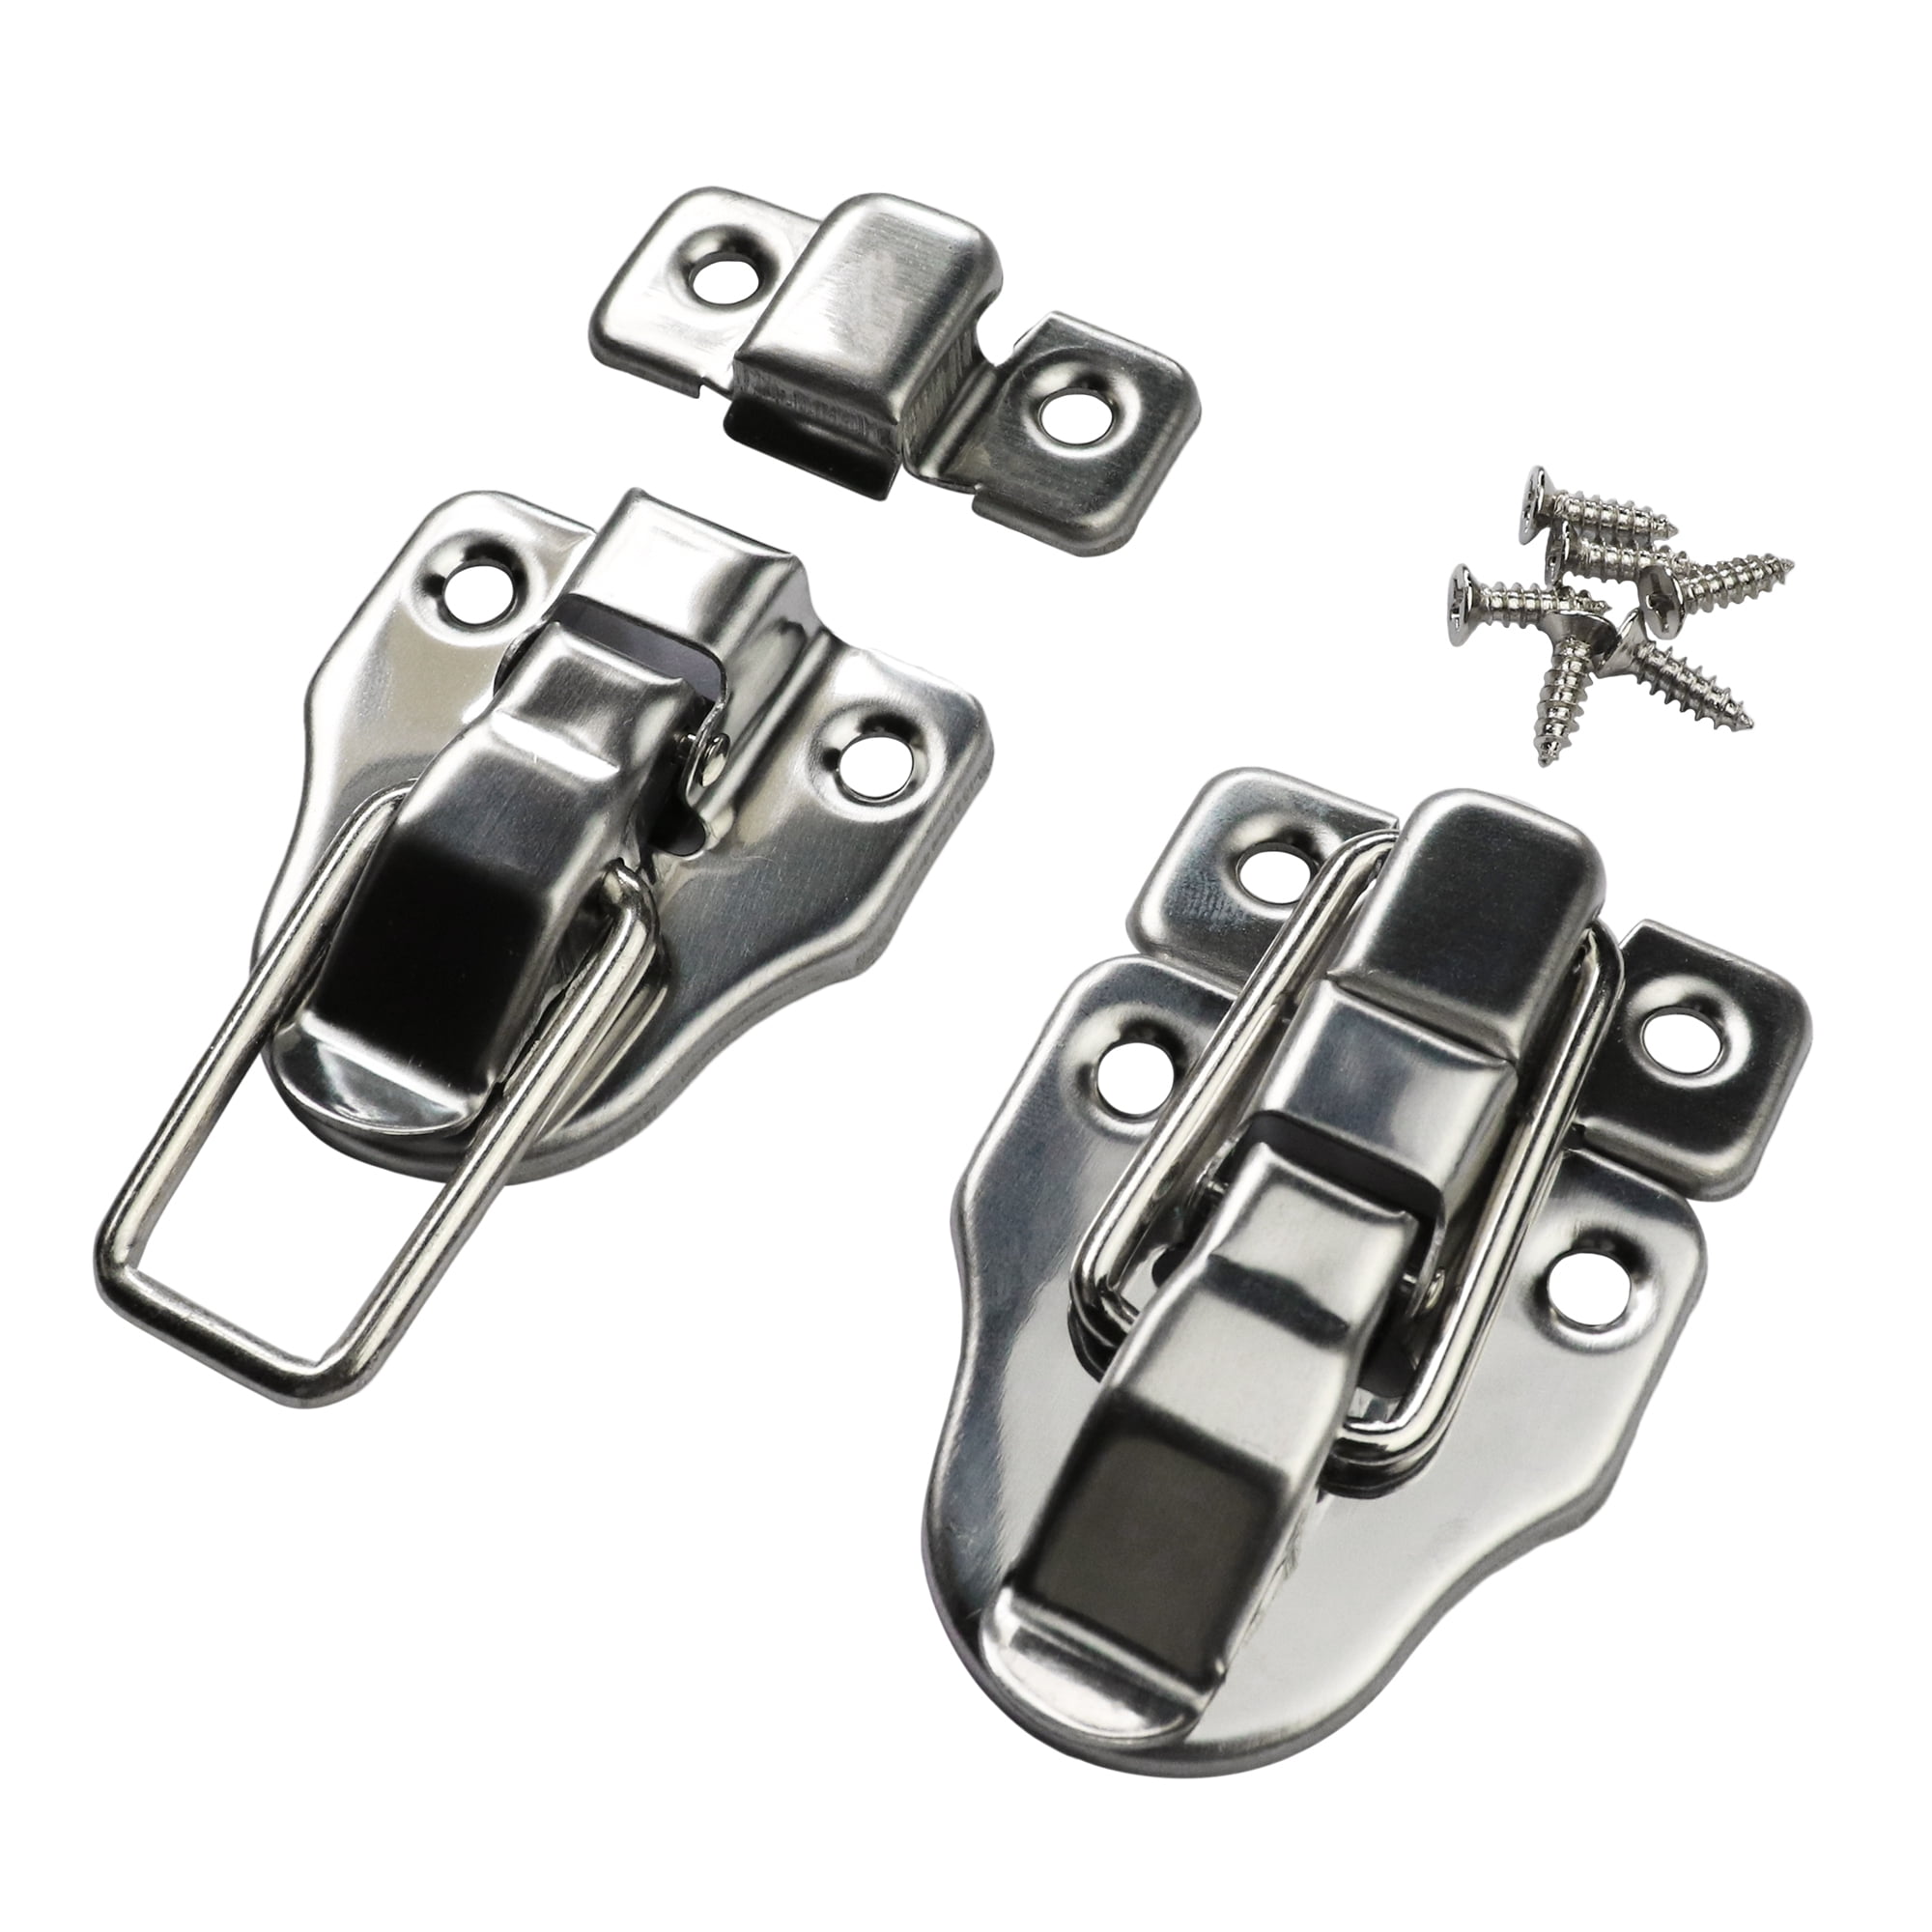 5x Wood Chest Box Latch Spring Loaded Toggle Chest Trunk Catch & Screws UK 